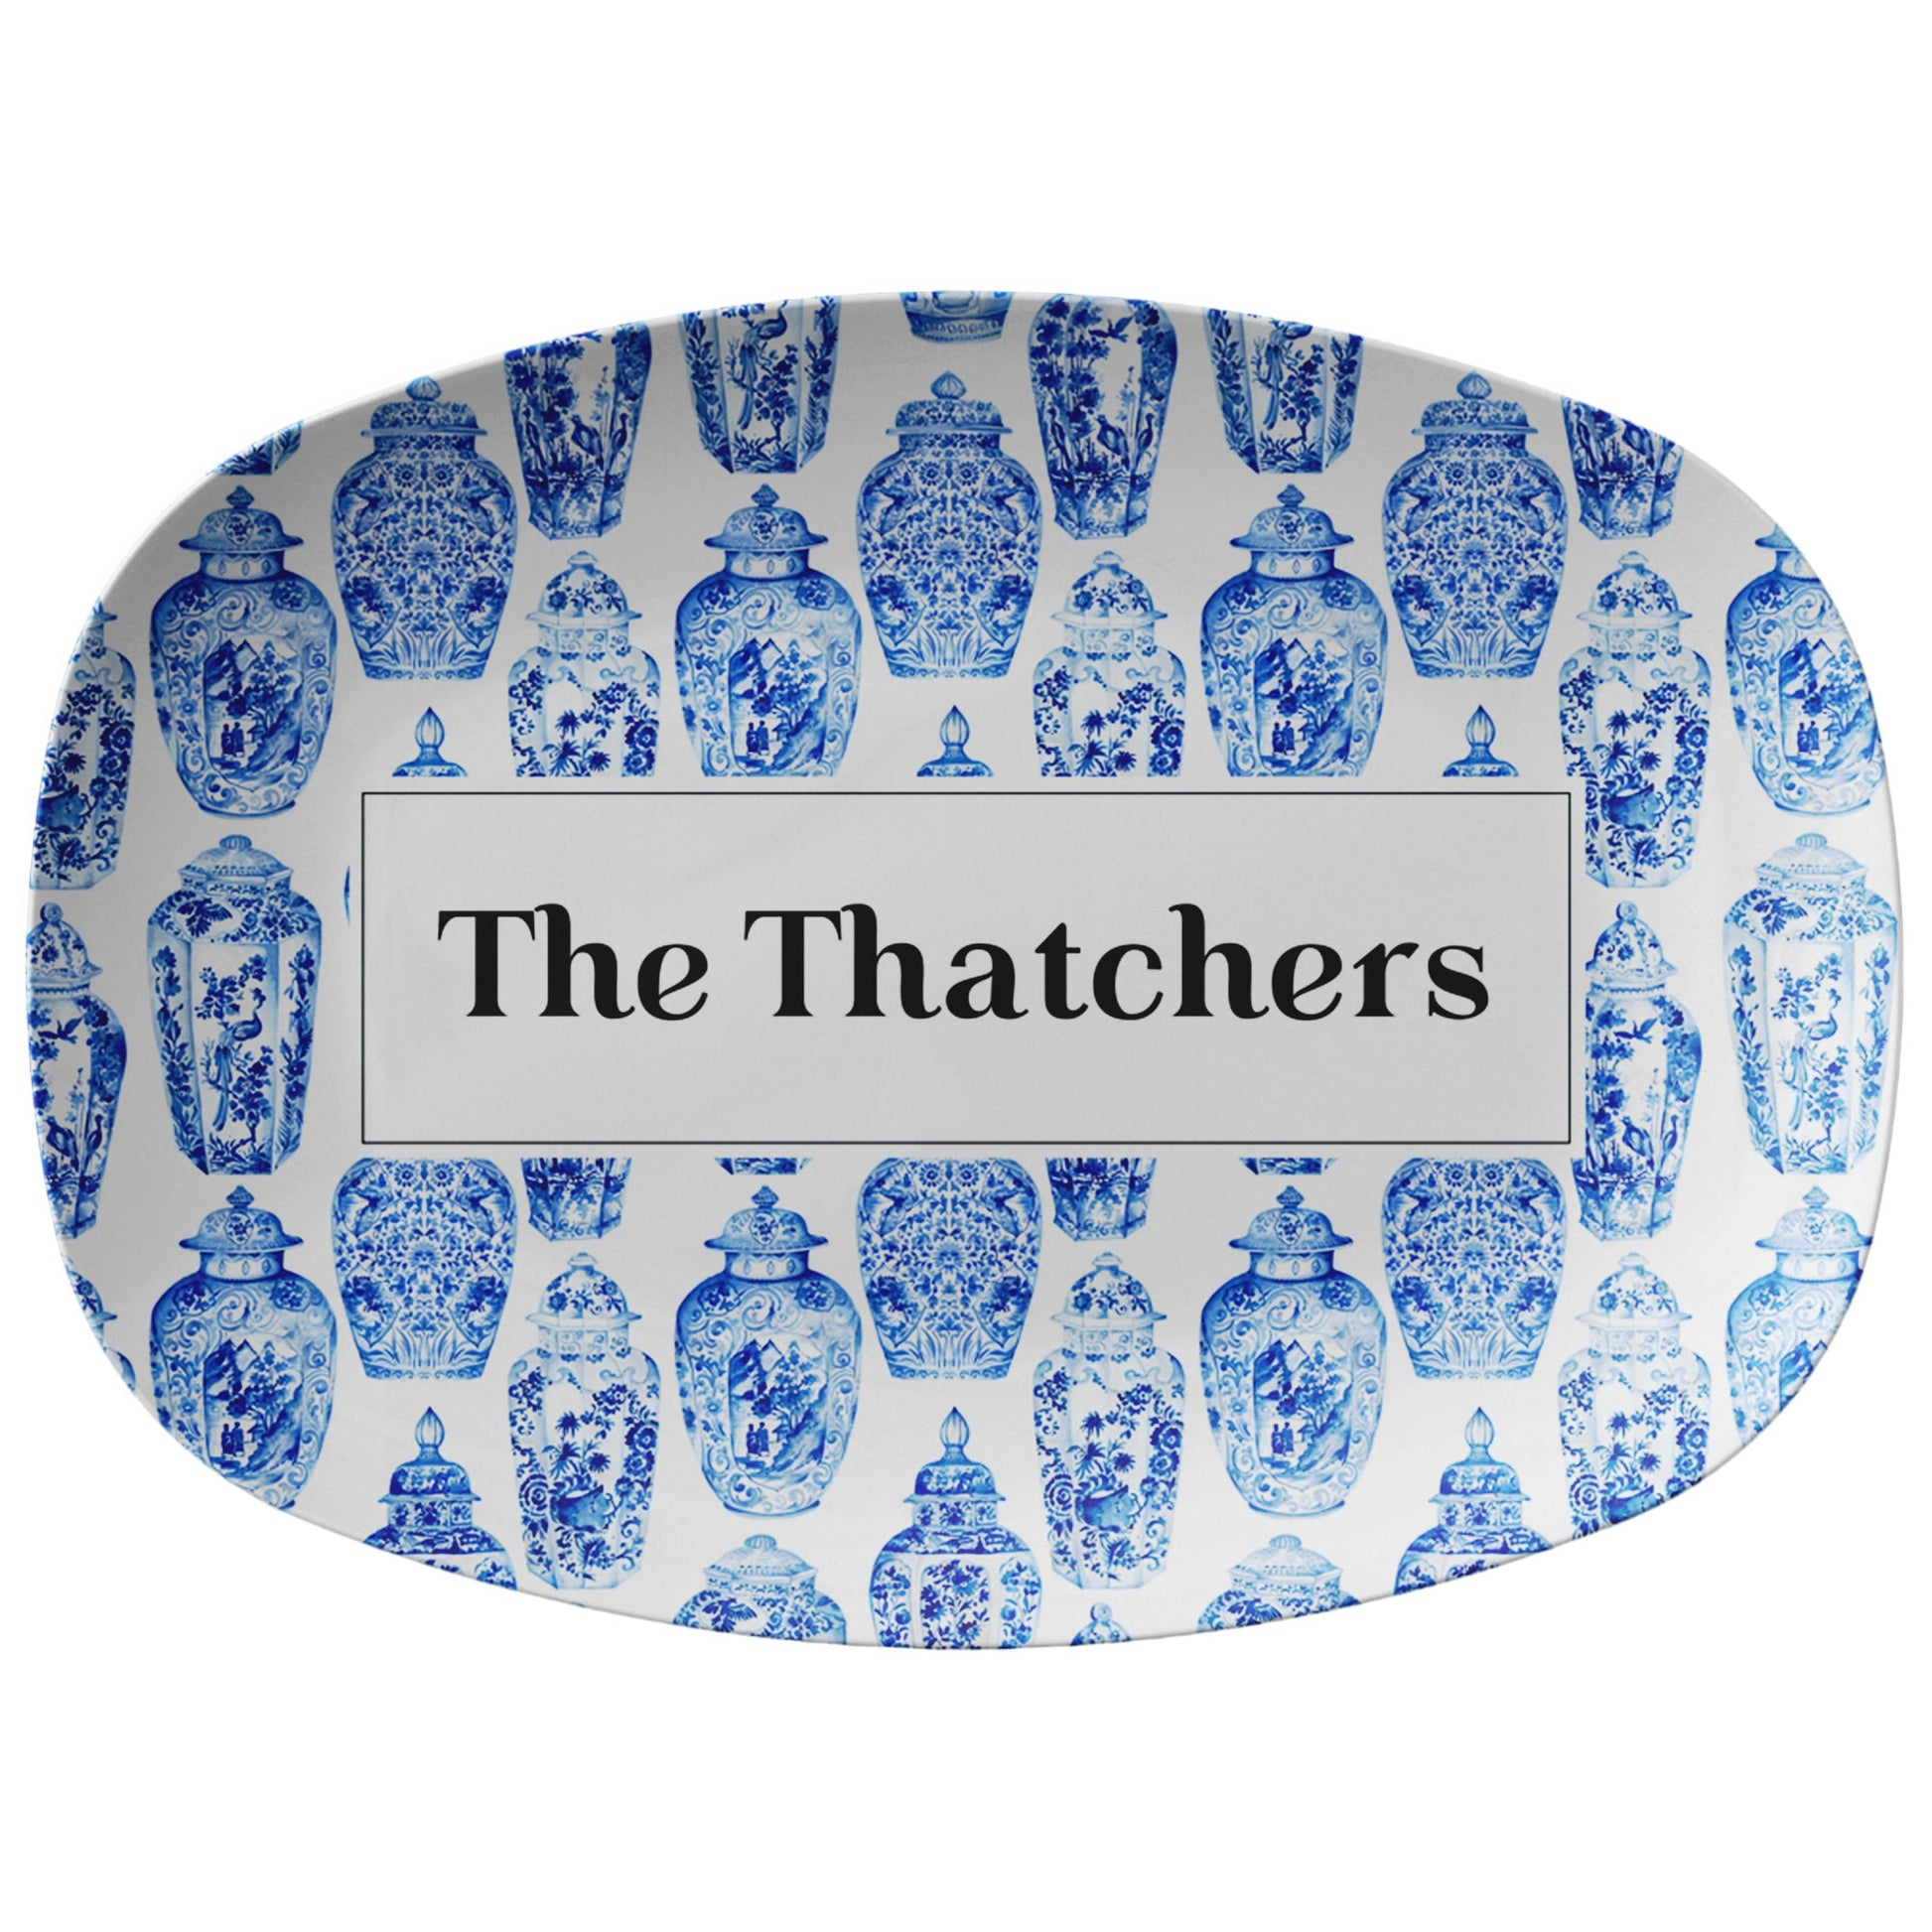 Blue and white ginger jars printed on platter can be personalized with any name or word.